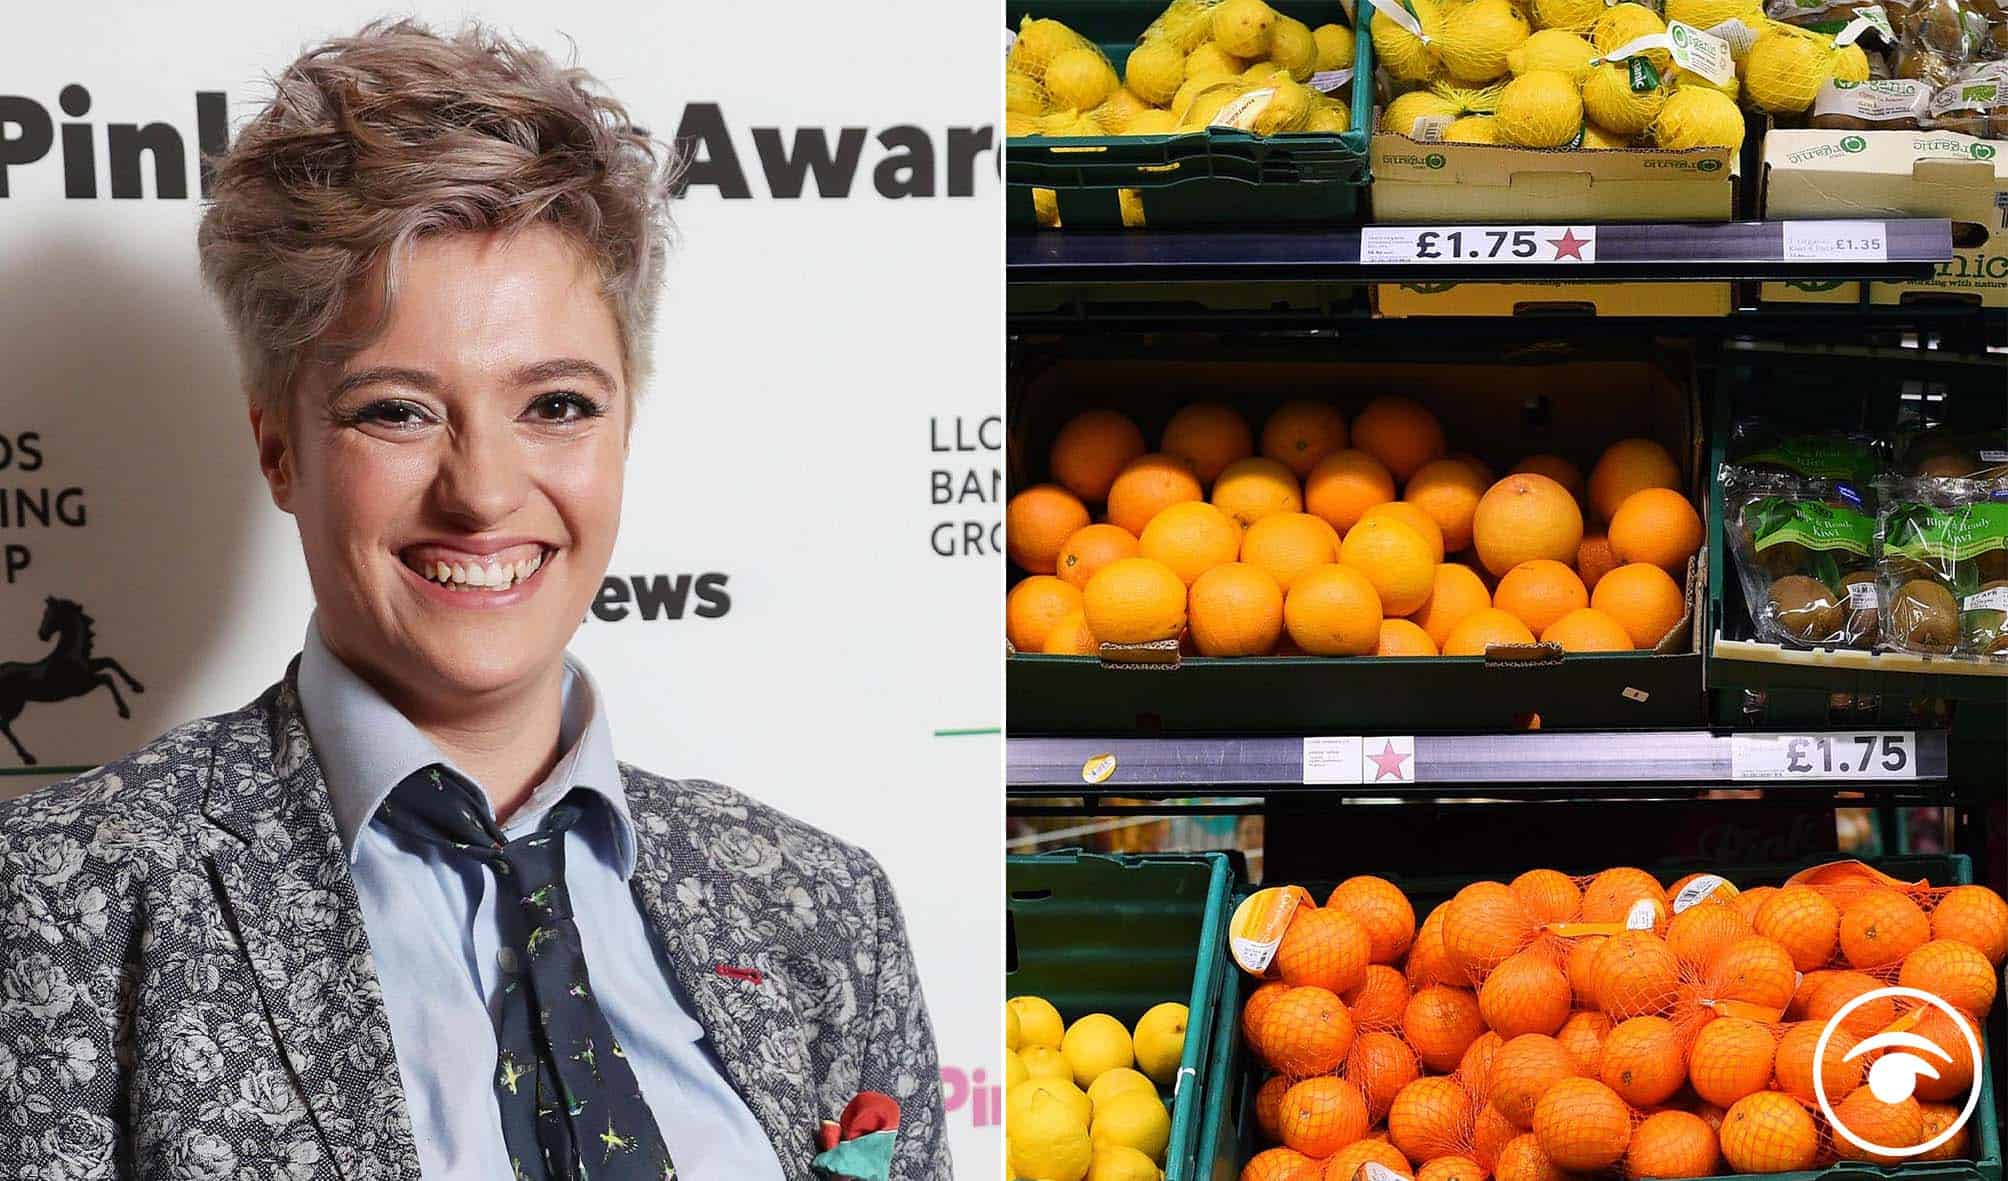 Praise for Jack Monroe as supermarket doubles access to low-priced goods